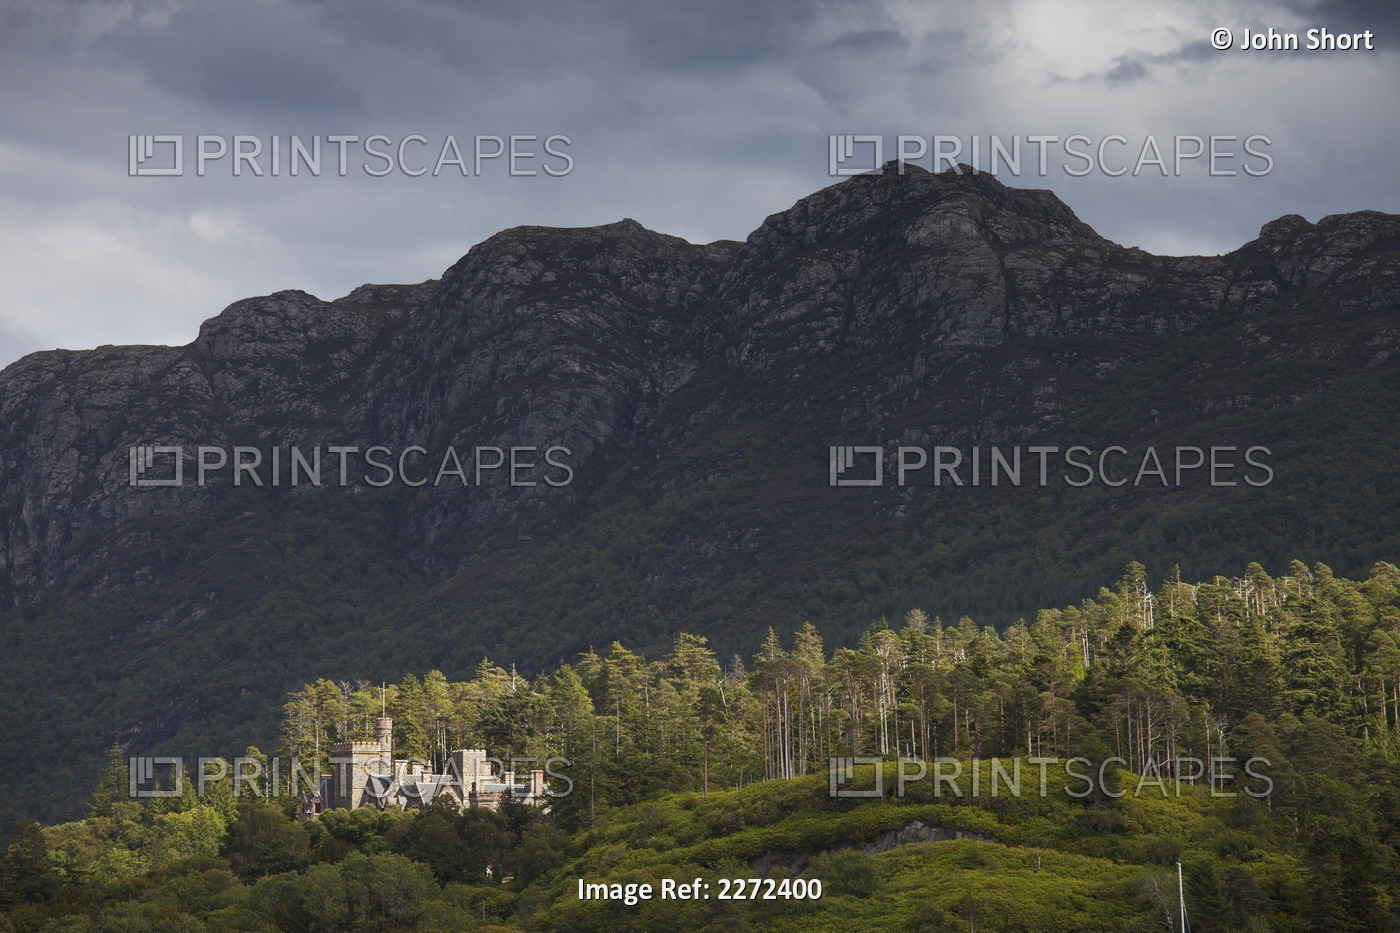 Castle on a hill on the edge of a forest; Plockton ros-shire scotland